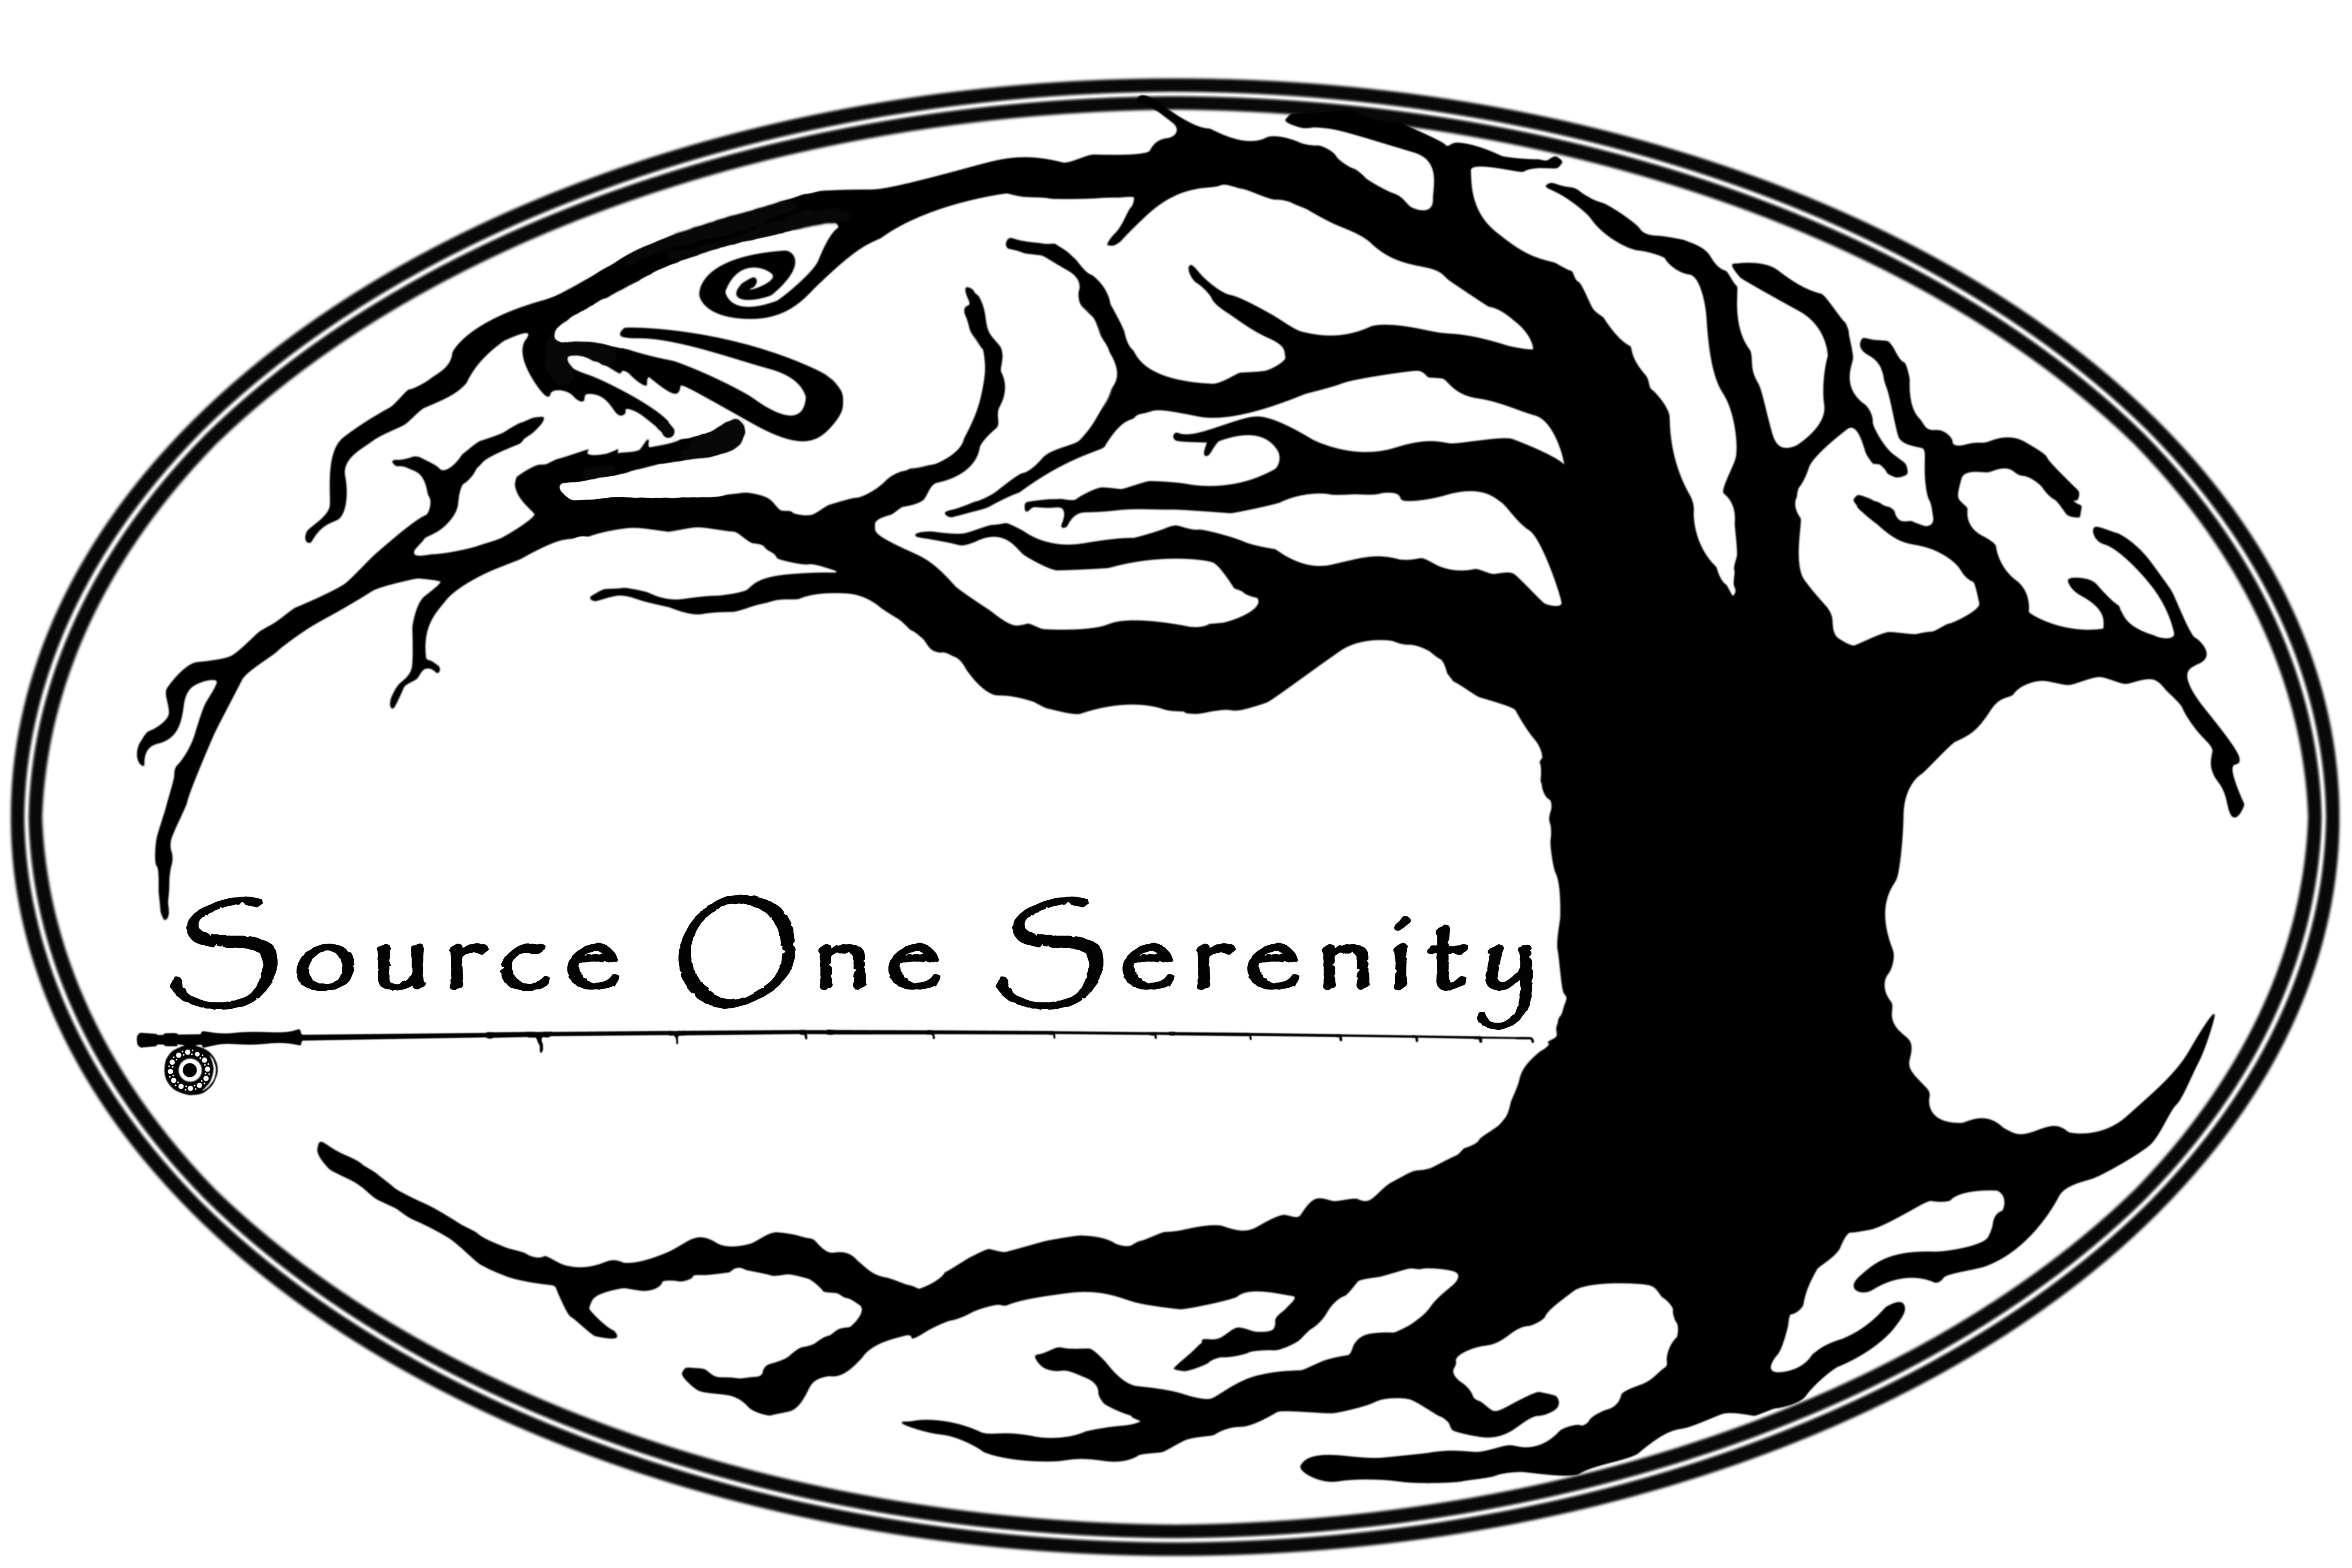 Source One Serenity